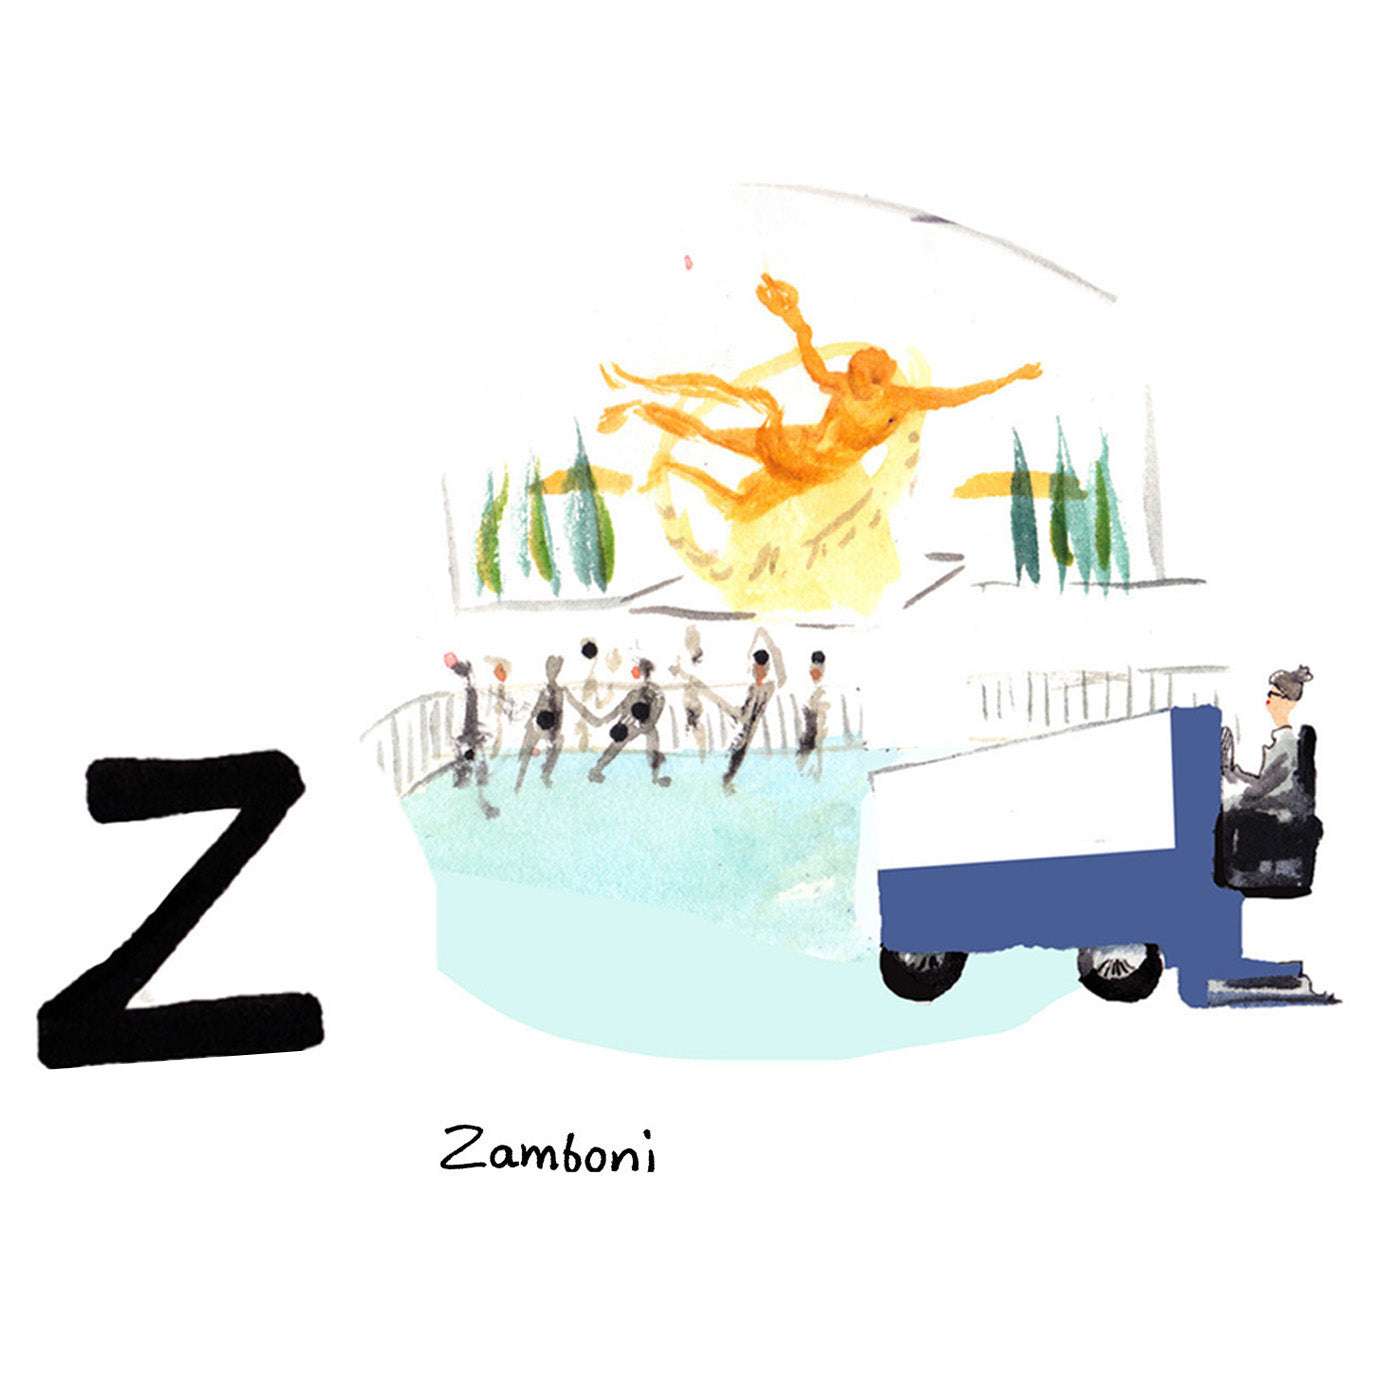 Z is for Zamboni. A zamboni is an ice rink cleaning and resurfacing device invented in 1949 by Frank Zamboni. They can be found smoothing the Rockefeller Center ice skating rink in the winter months. 